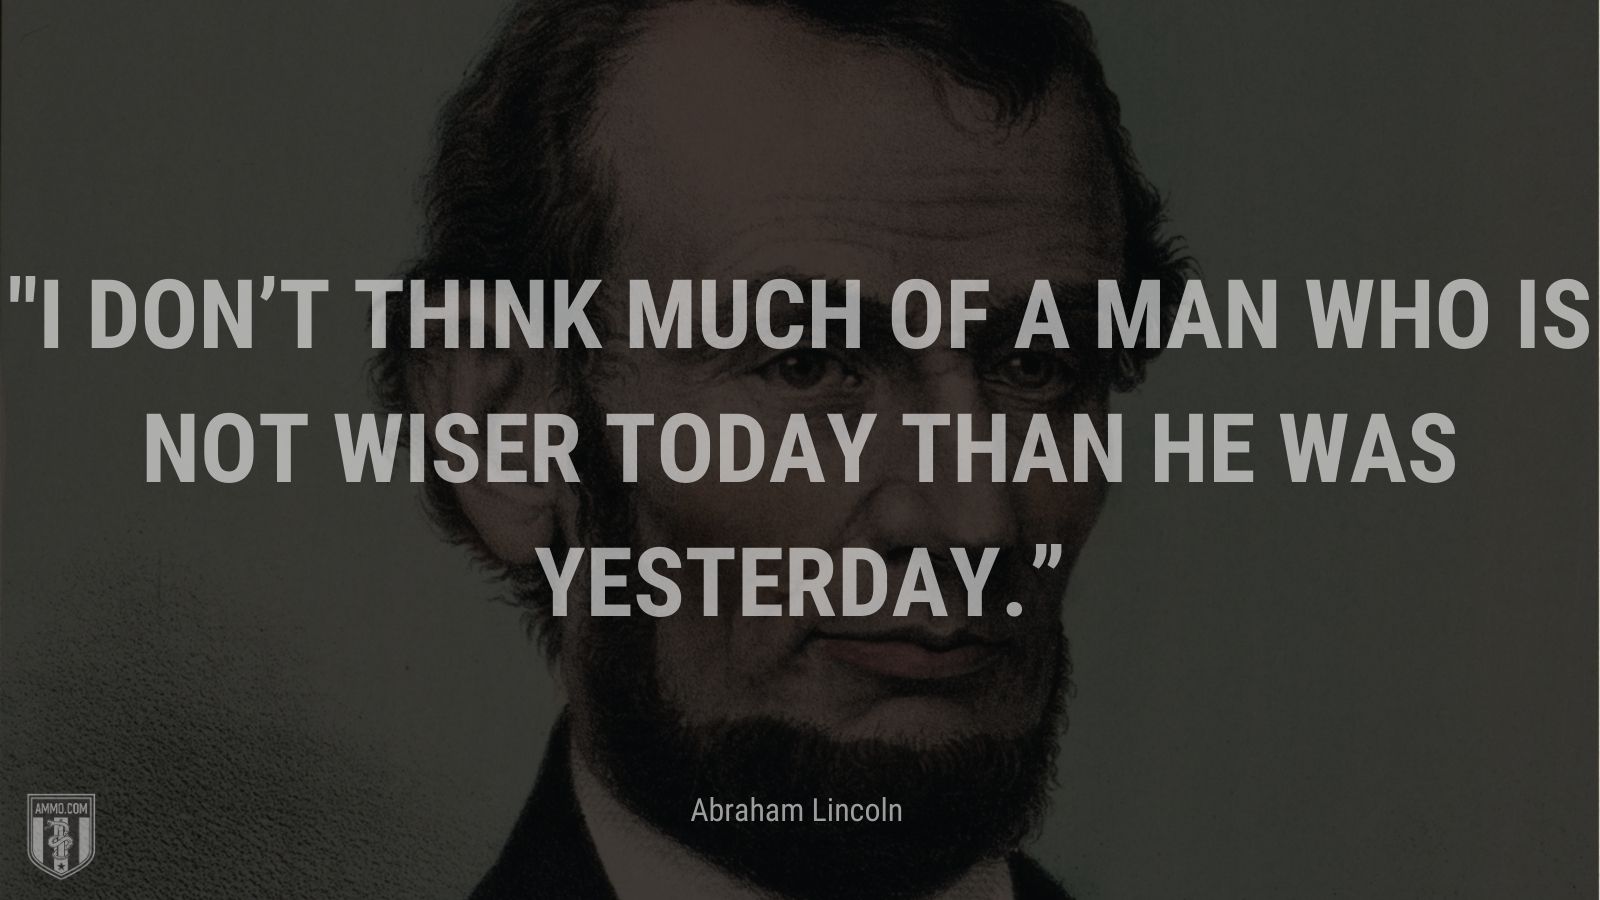 “I don’t think much of a man who is not wiser today than he was yesterday.” - Abraham Lincoln